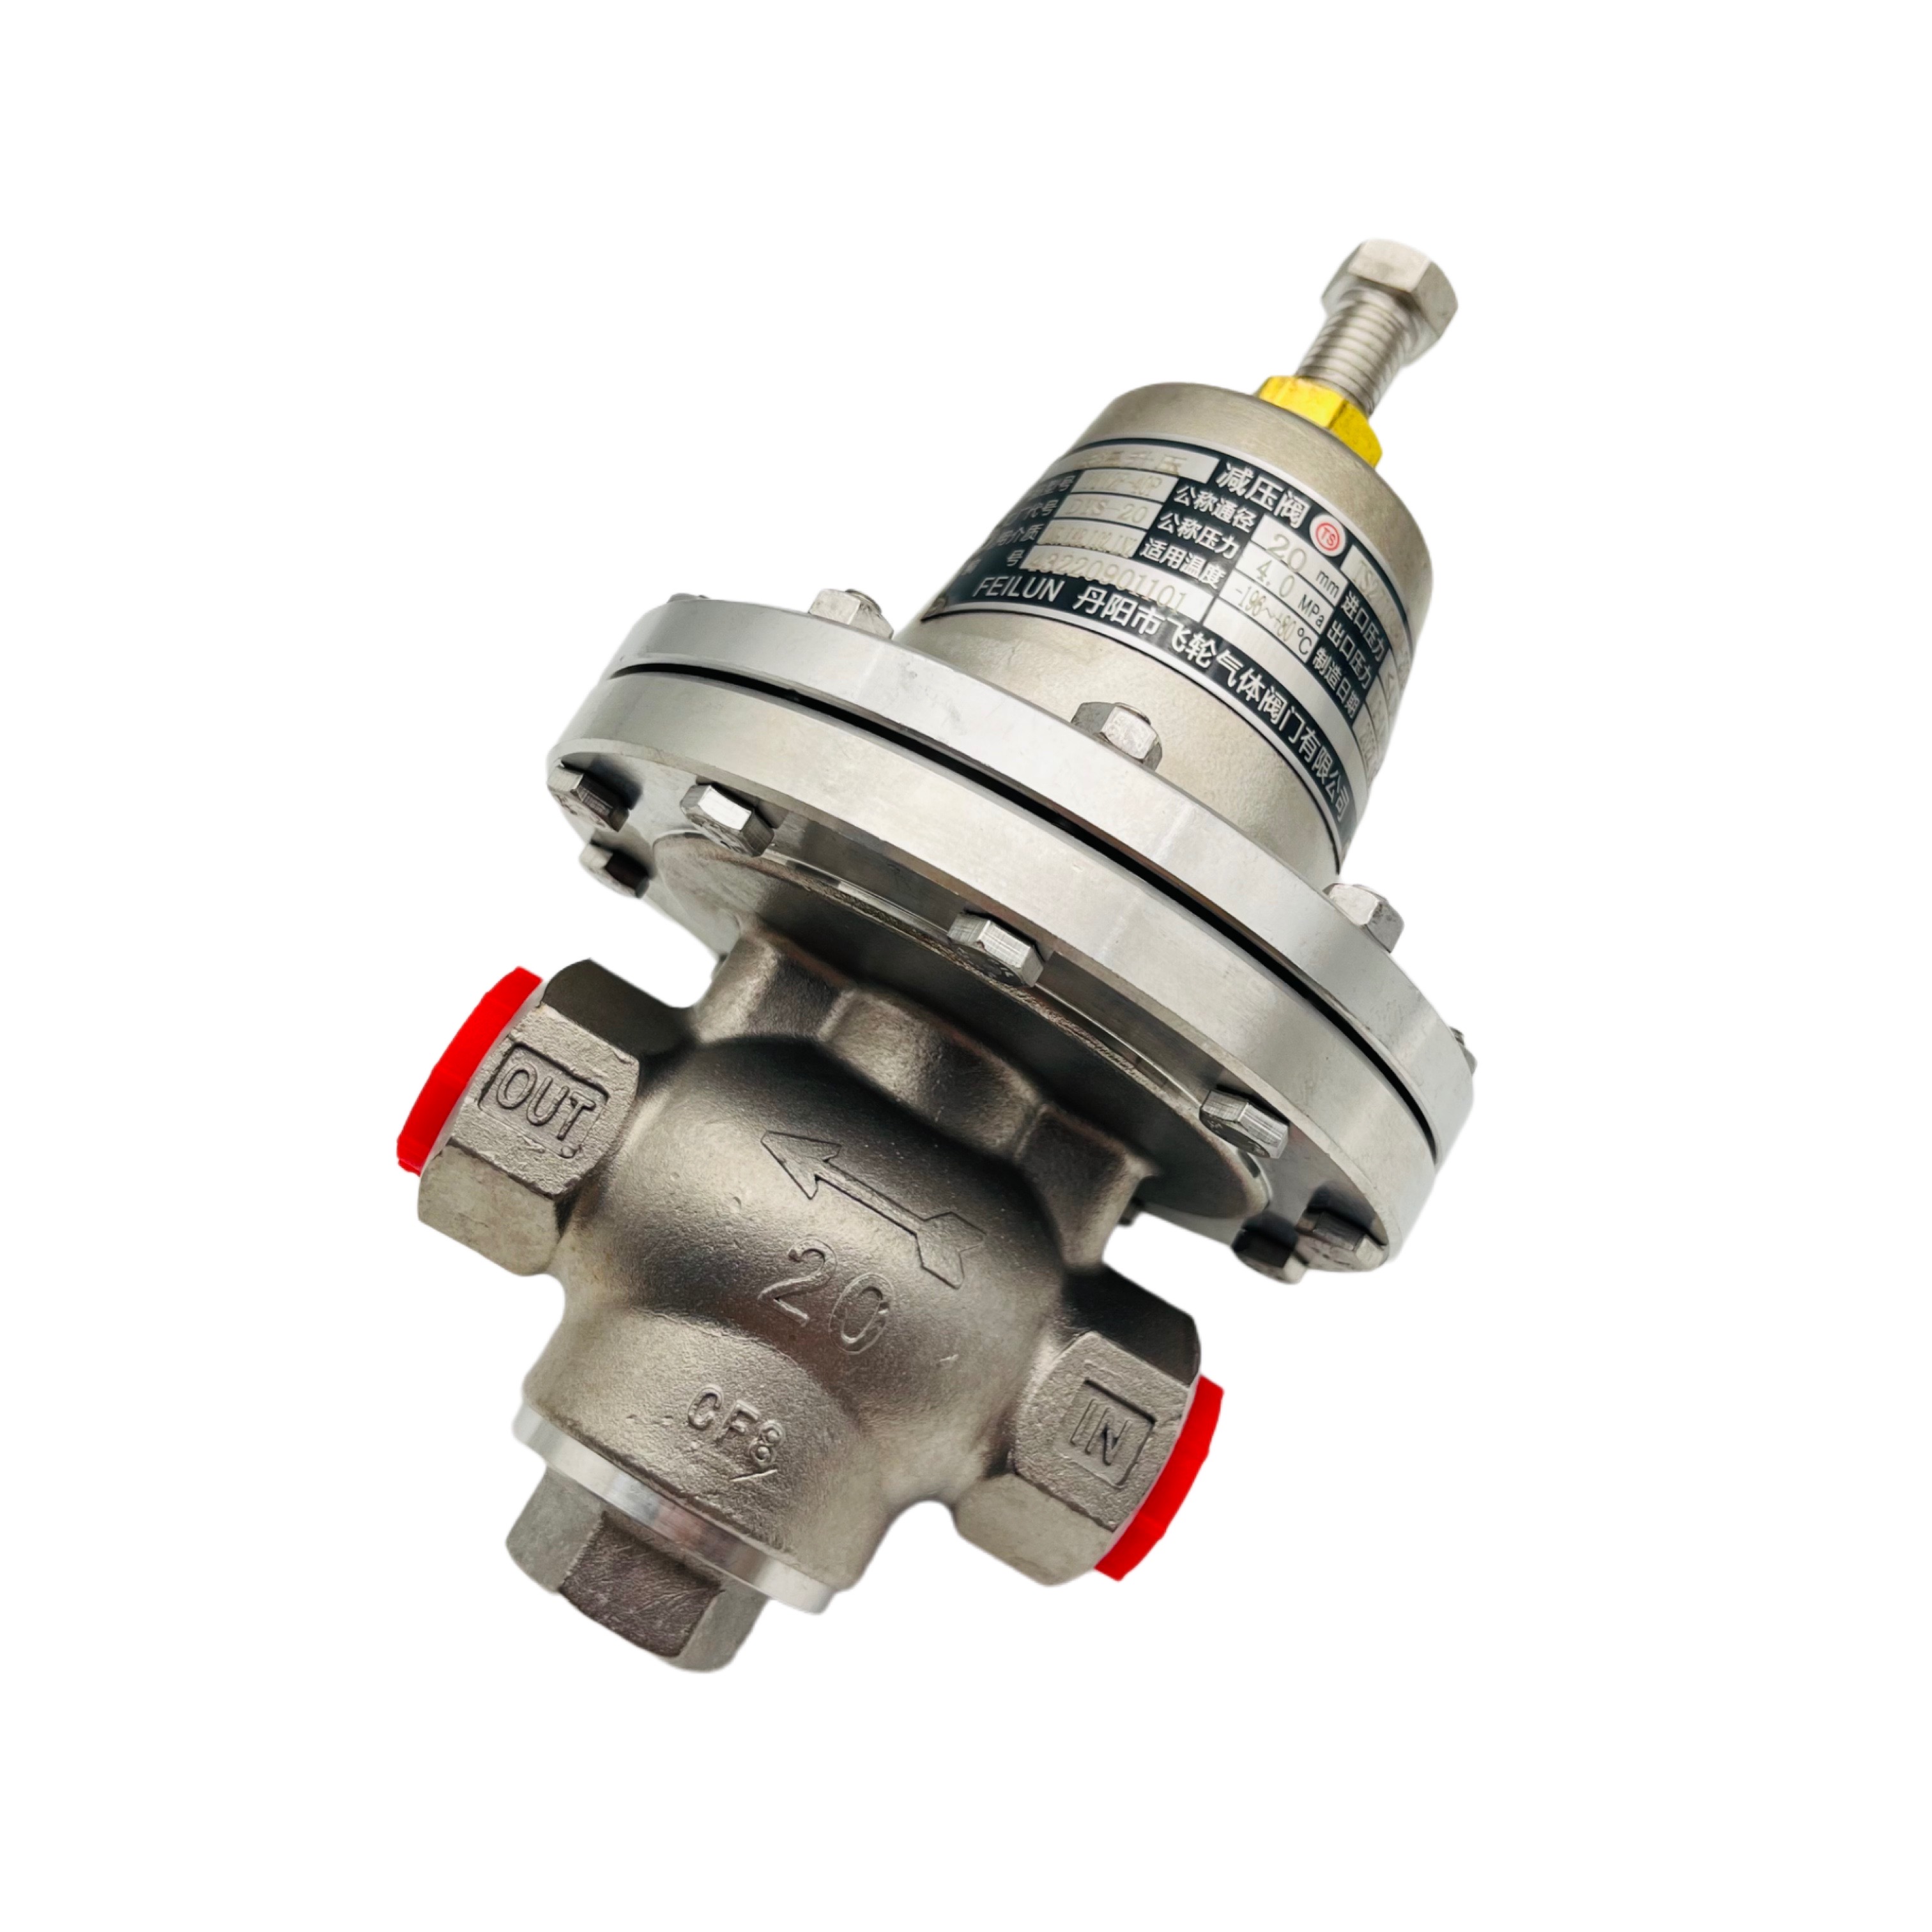 DYS-20 Stainless Steel Low Temperature Cryogenic Pressure Building Regulator